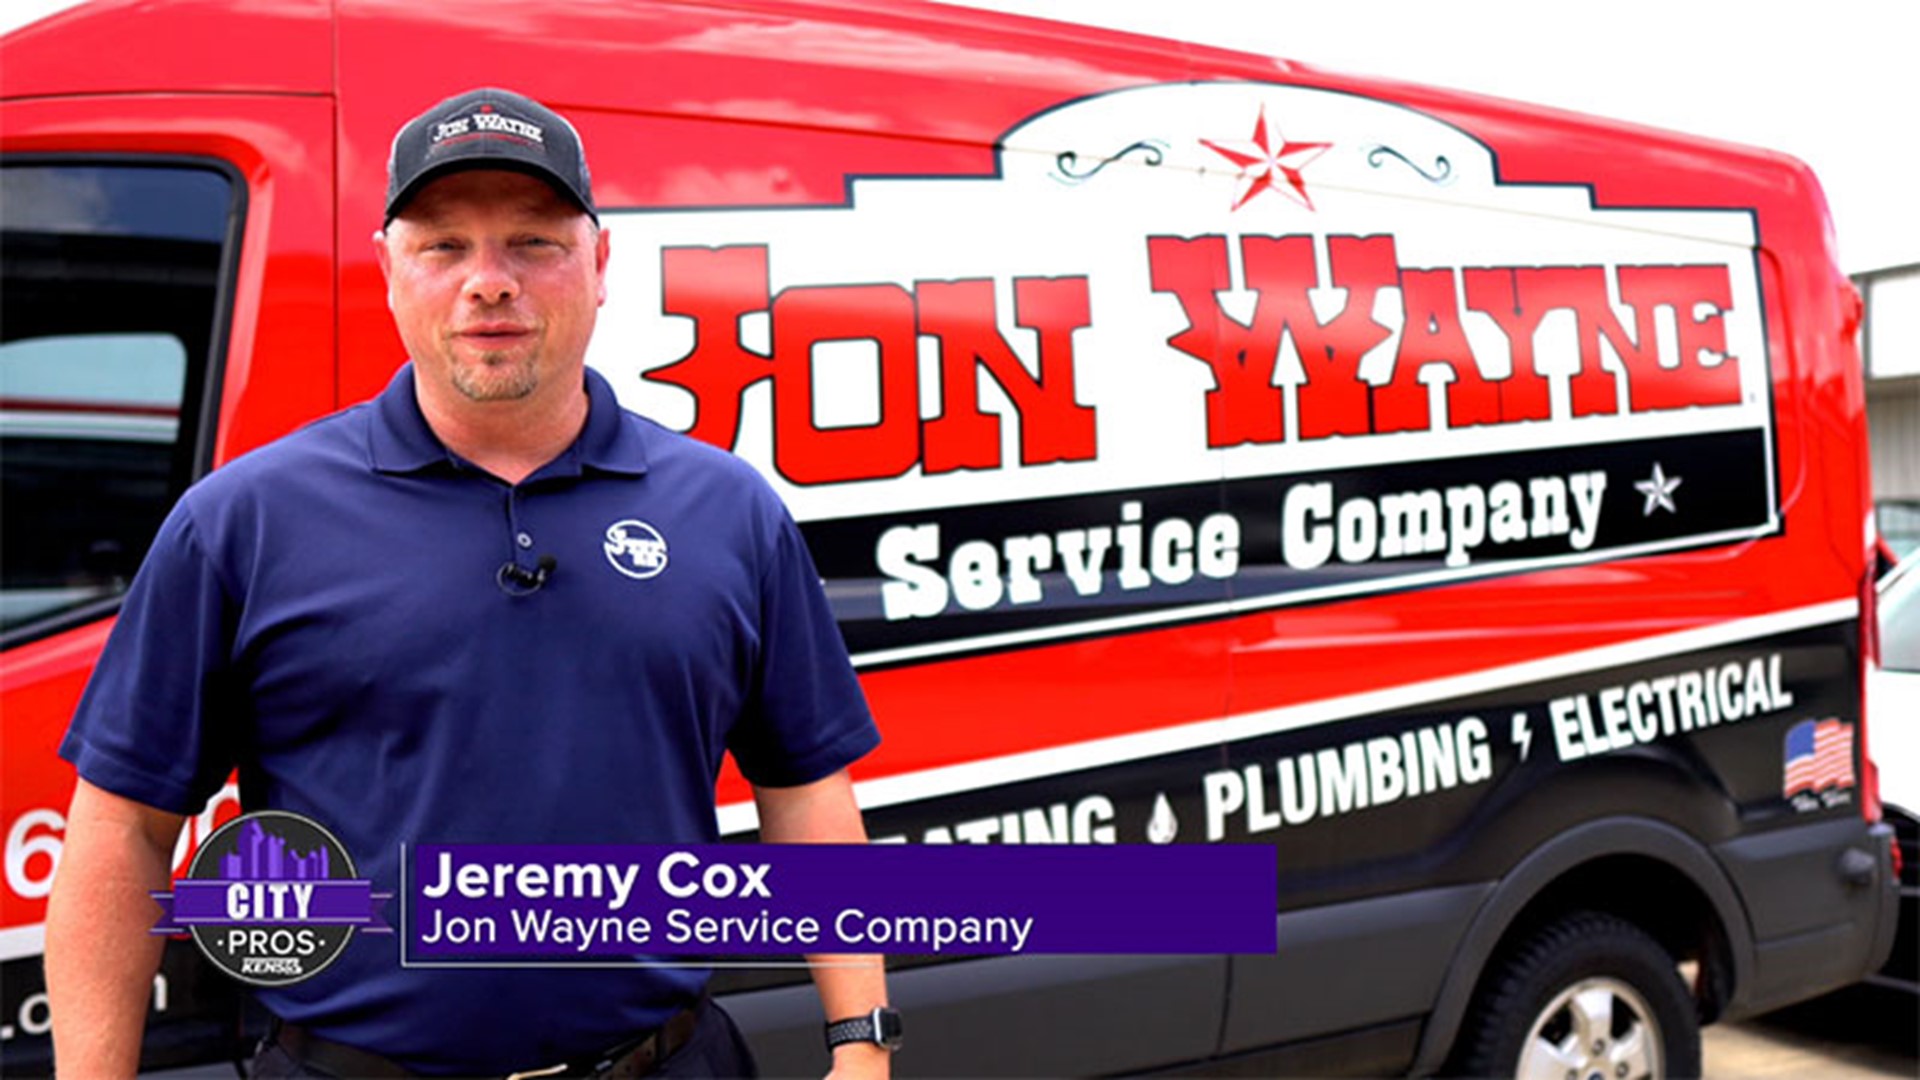 Jon Wayne has many services to help make your home better.